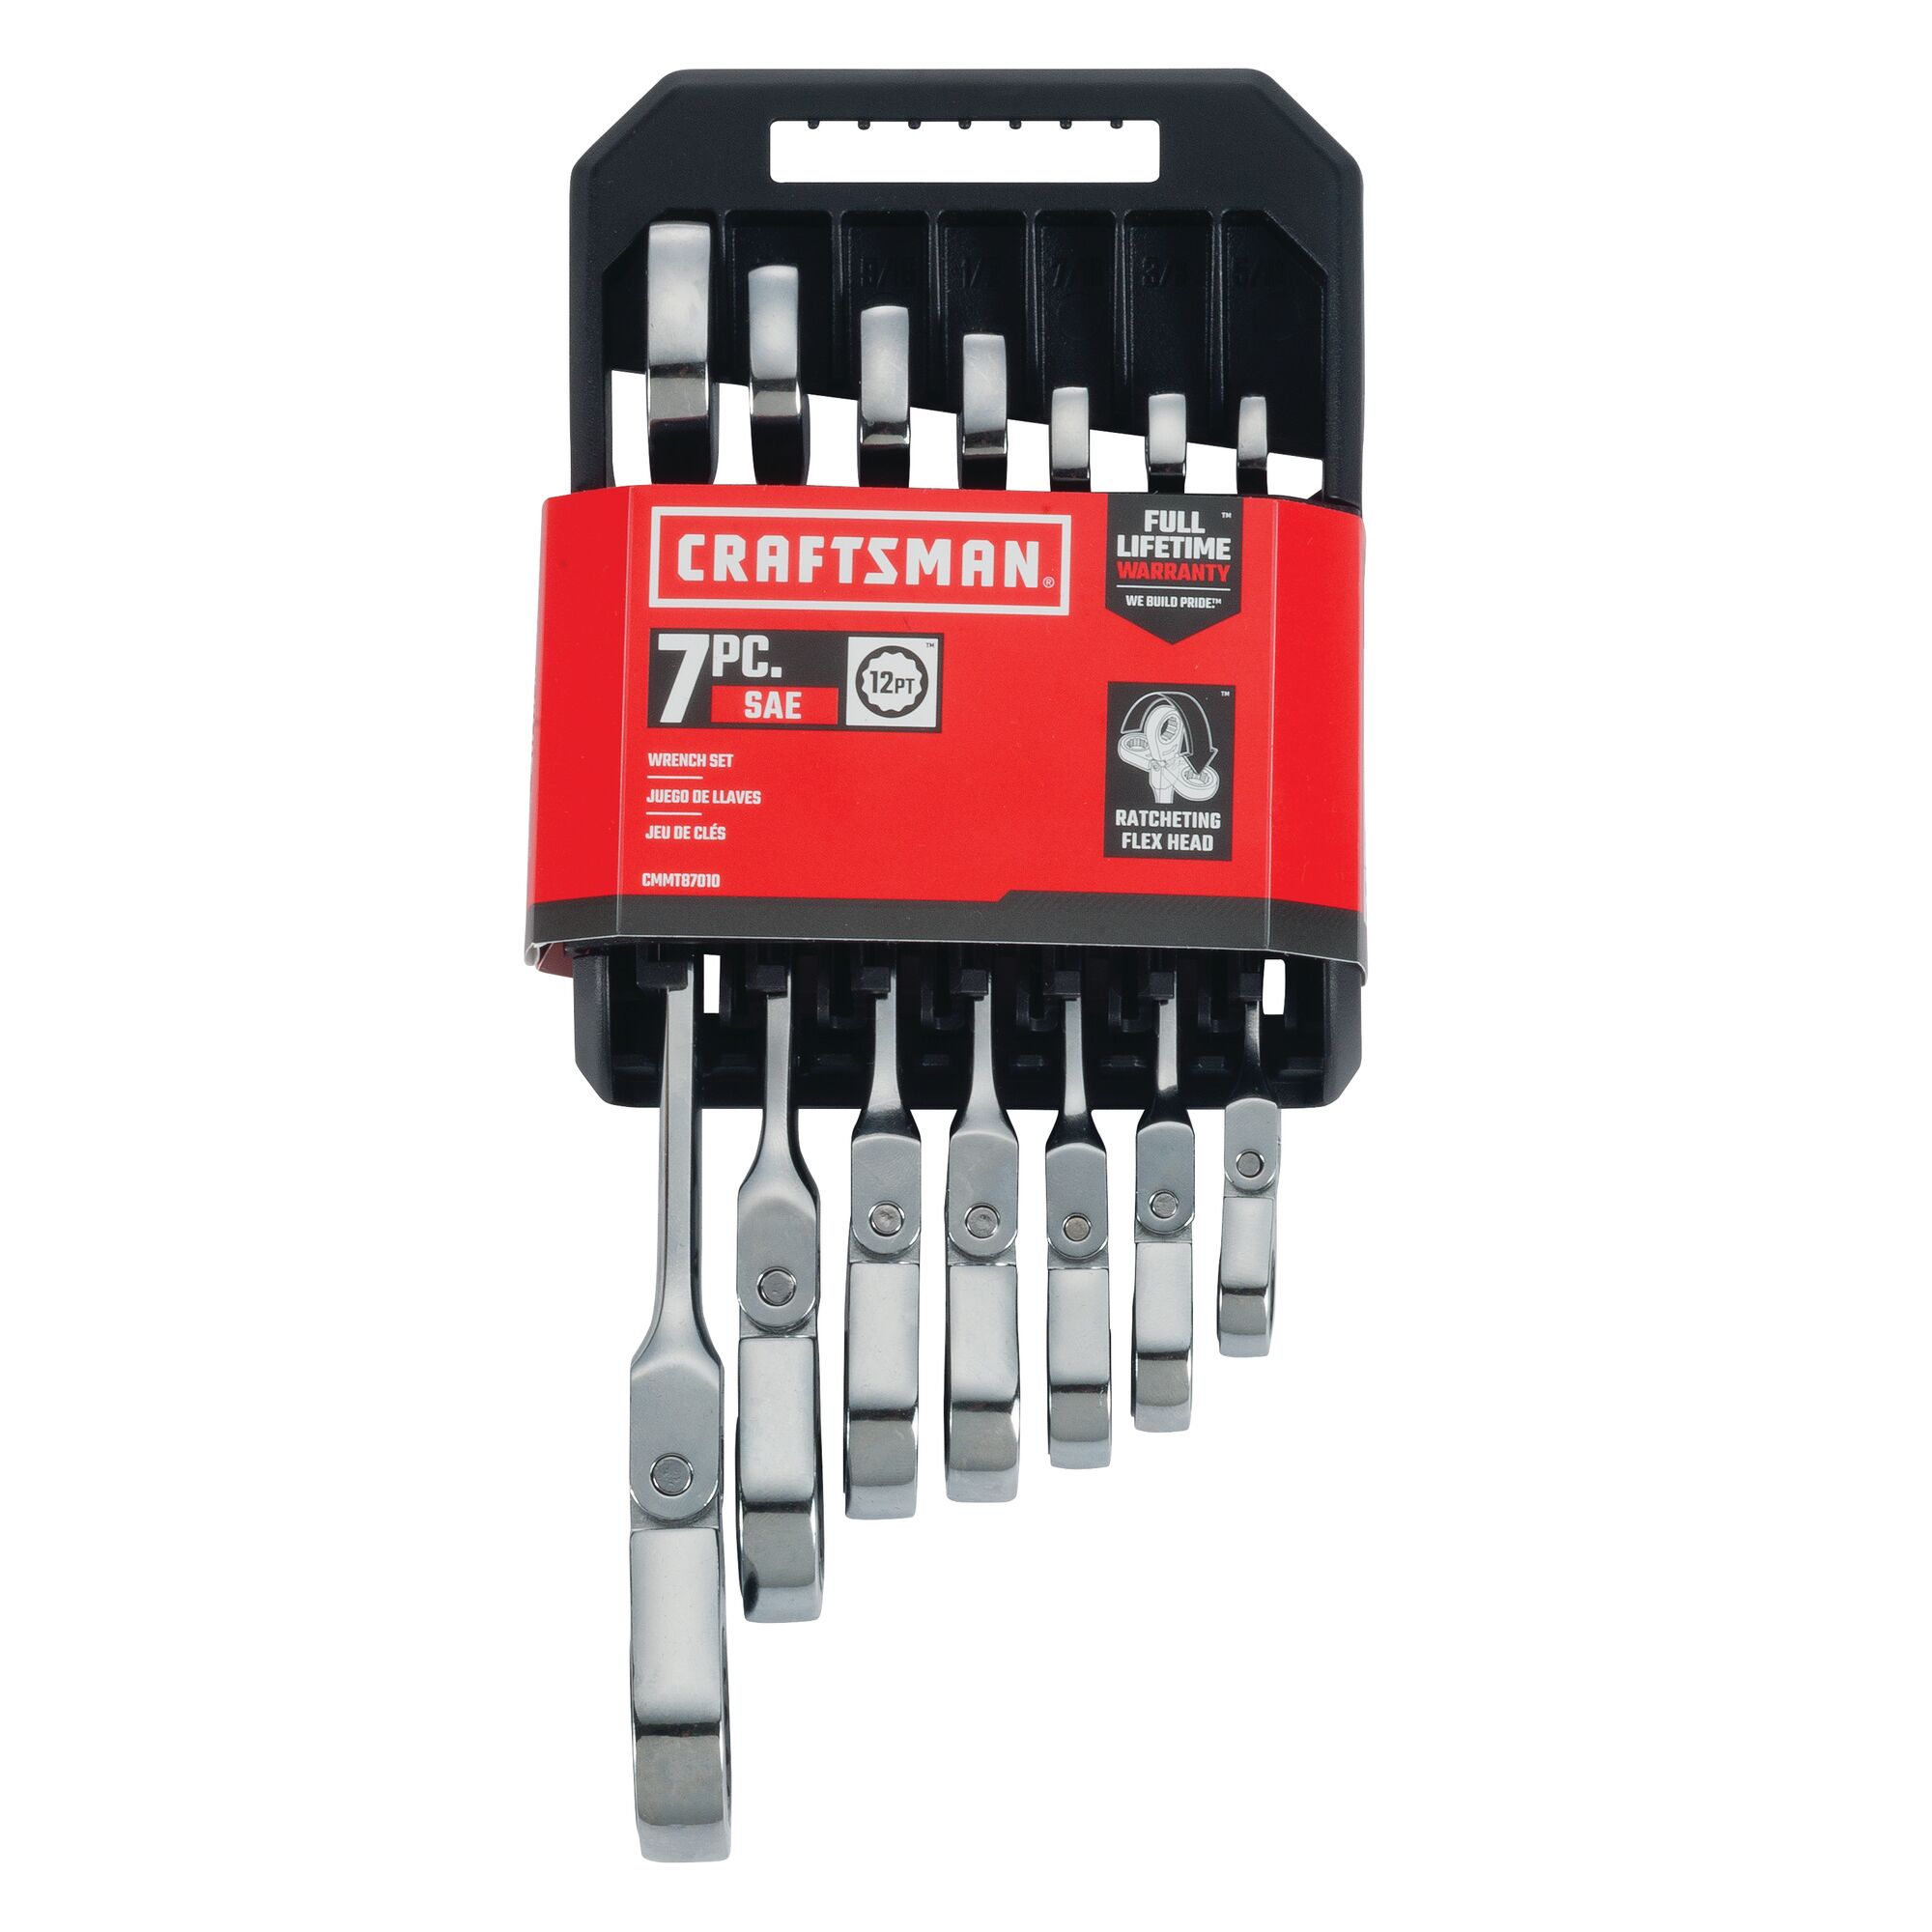 7 piece S A E flex head ratchet wrench set in packaging.